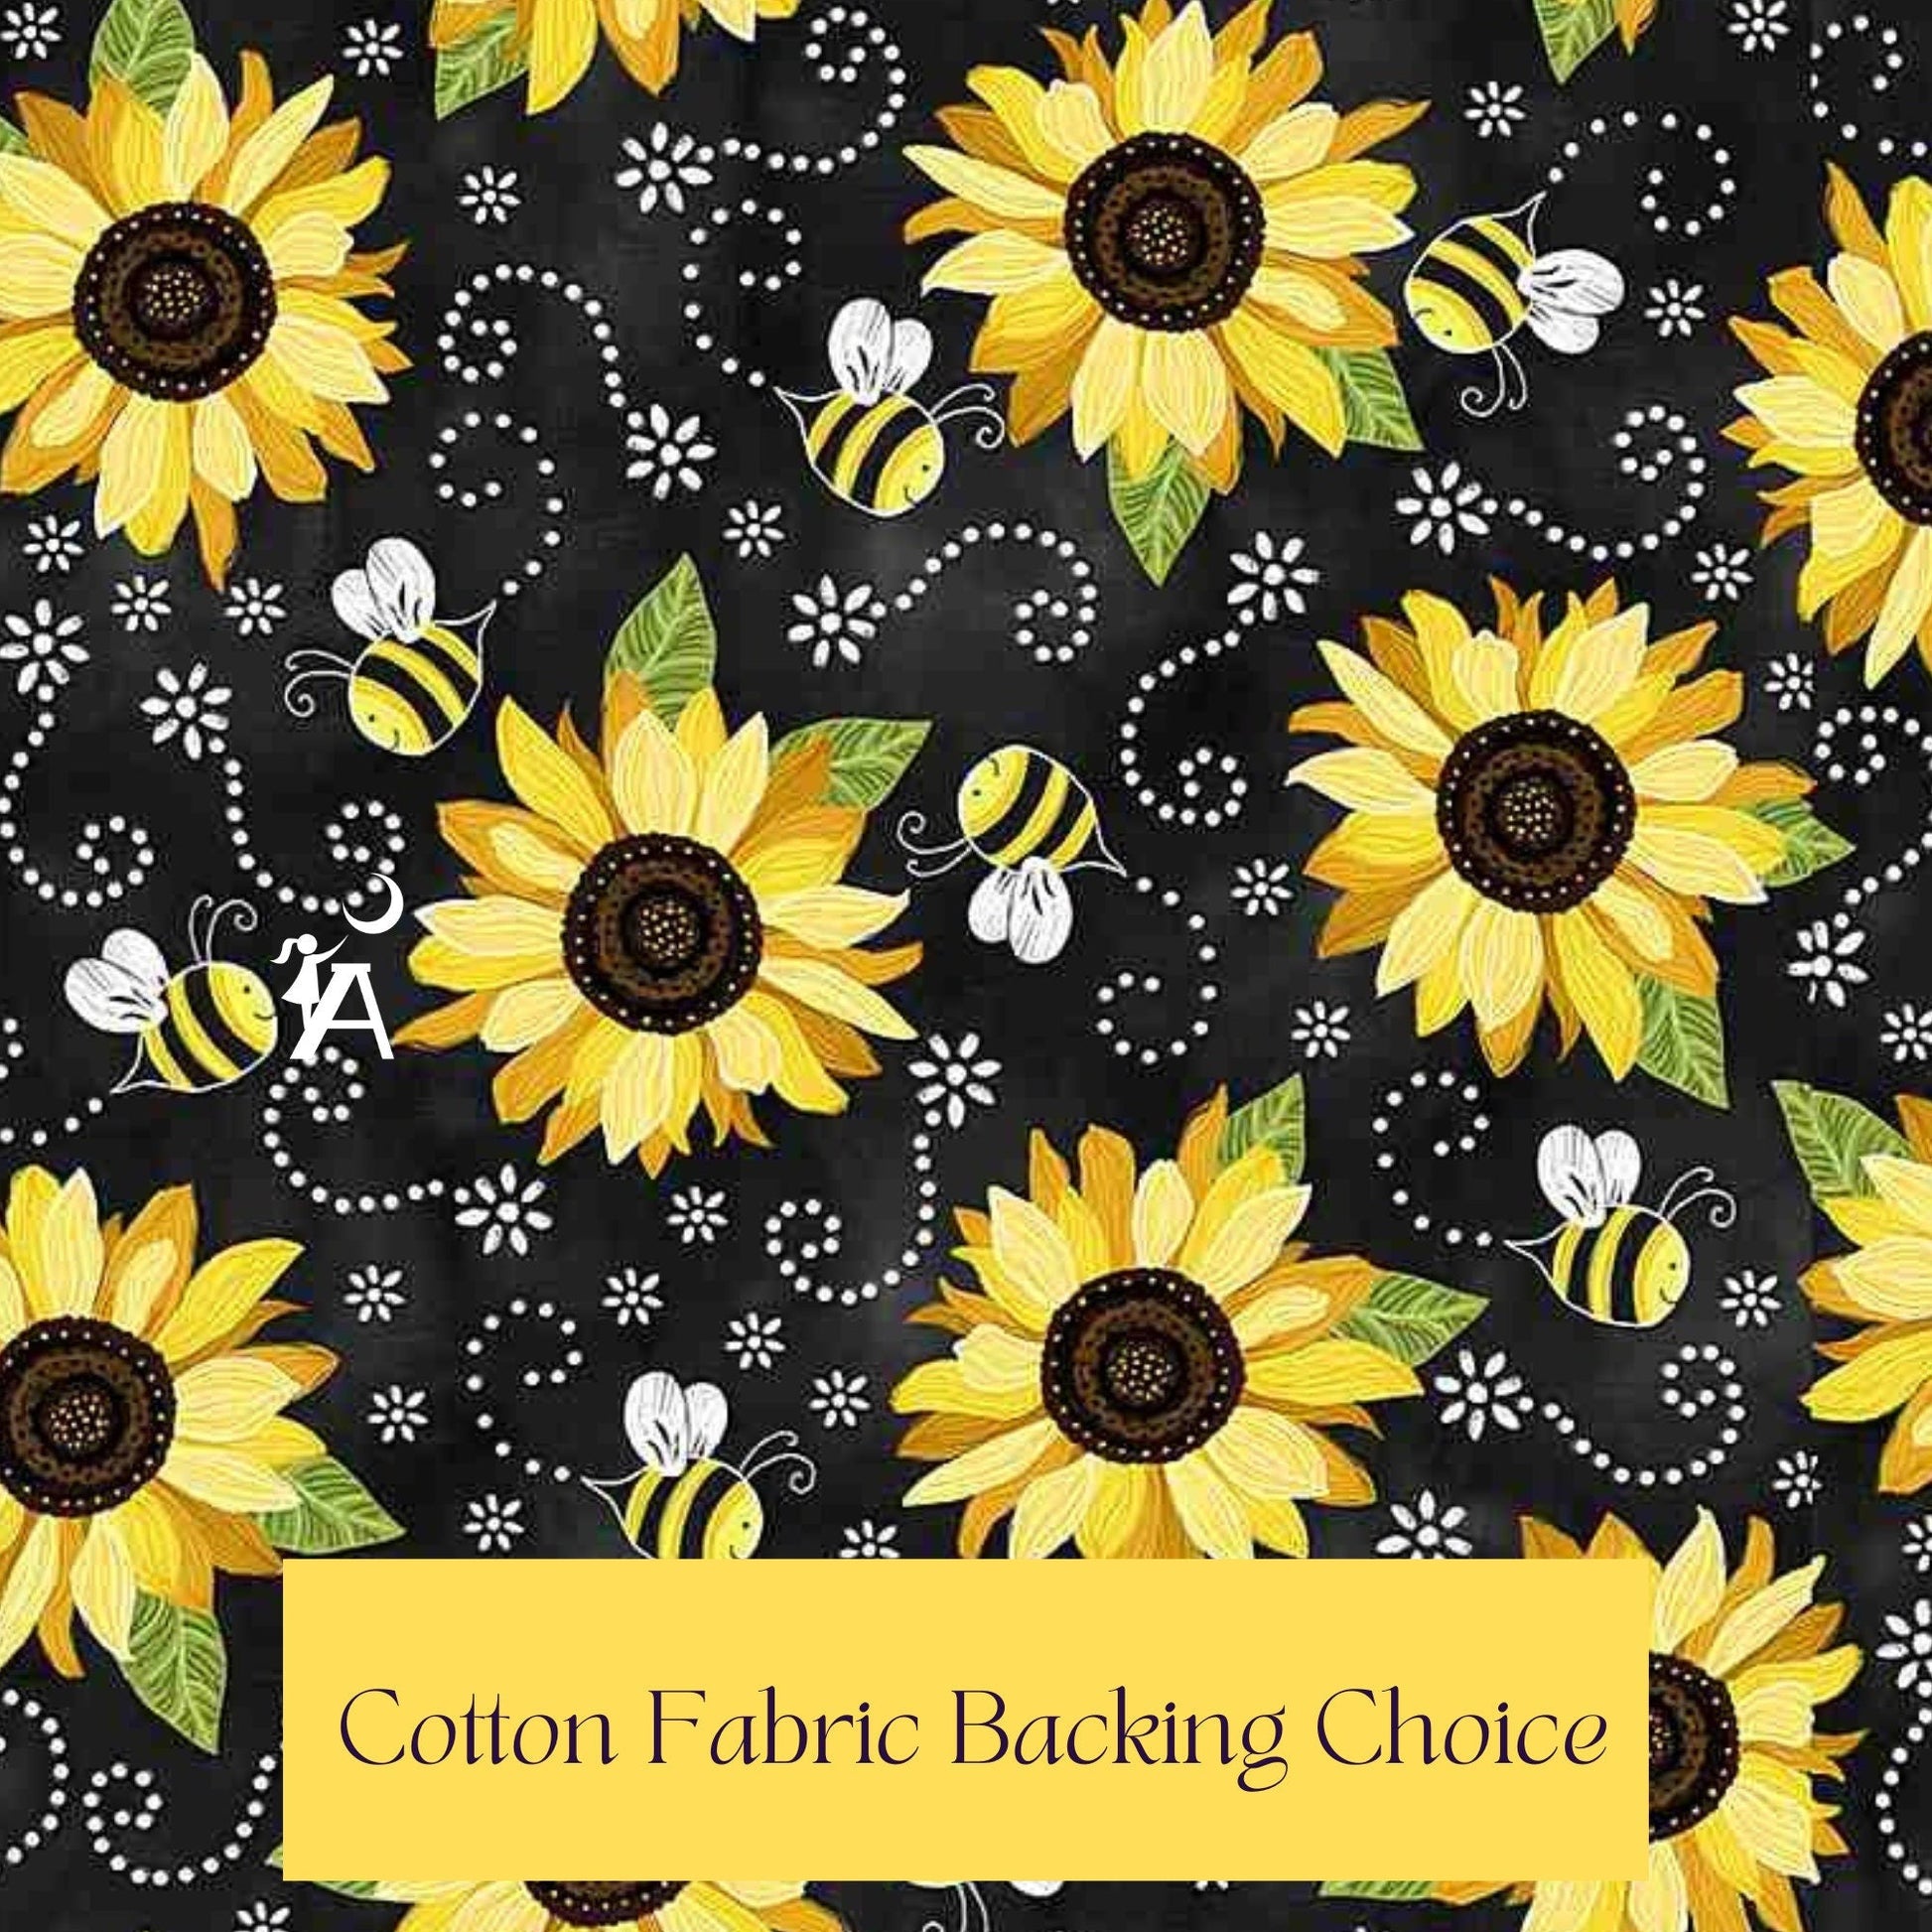 Timeless Treasures Quilt Kit Kit w/cottonBk-sunfl You are my Sunshine Beginner Quilt Kit with pattern & Fabric, Easy DIY, Picture This Pattern with Sunflower Panel